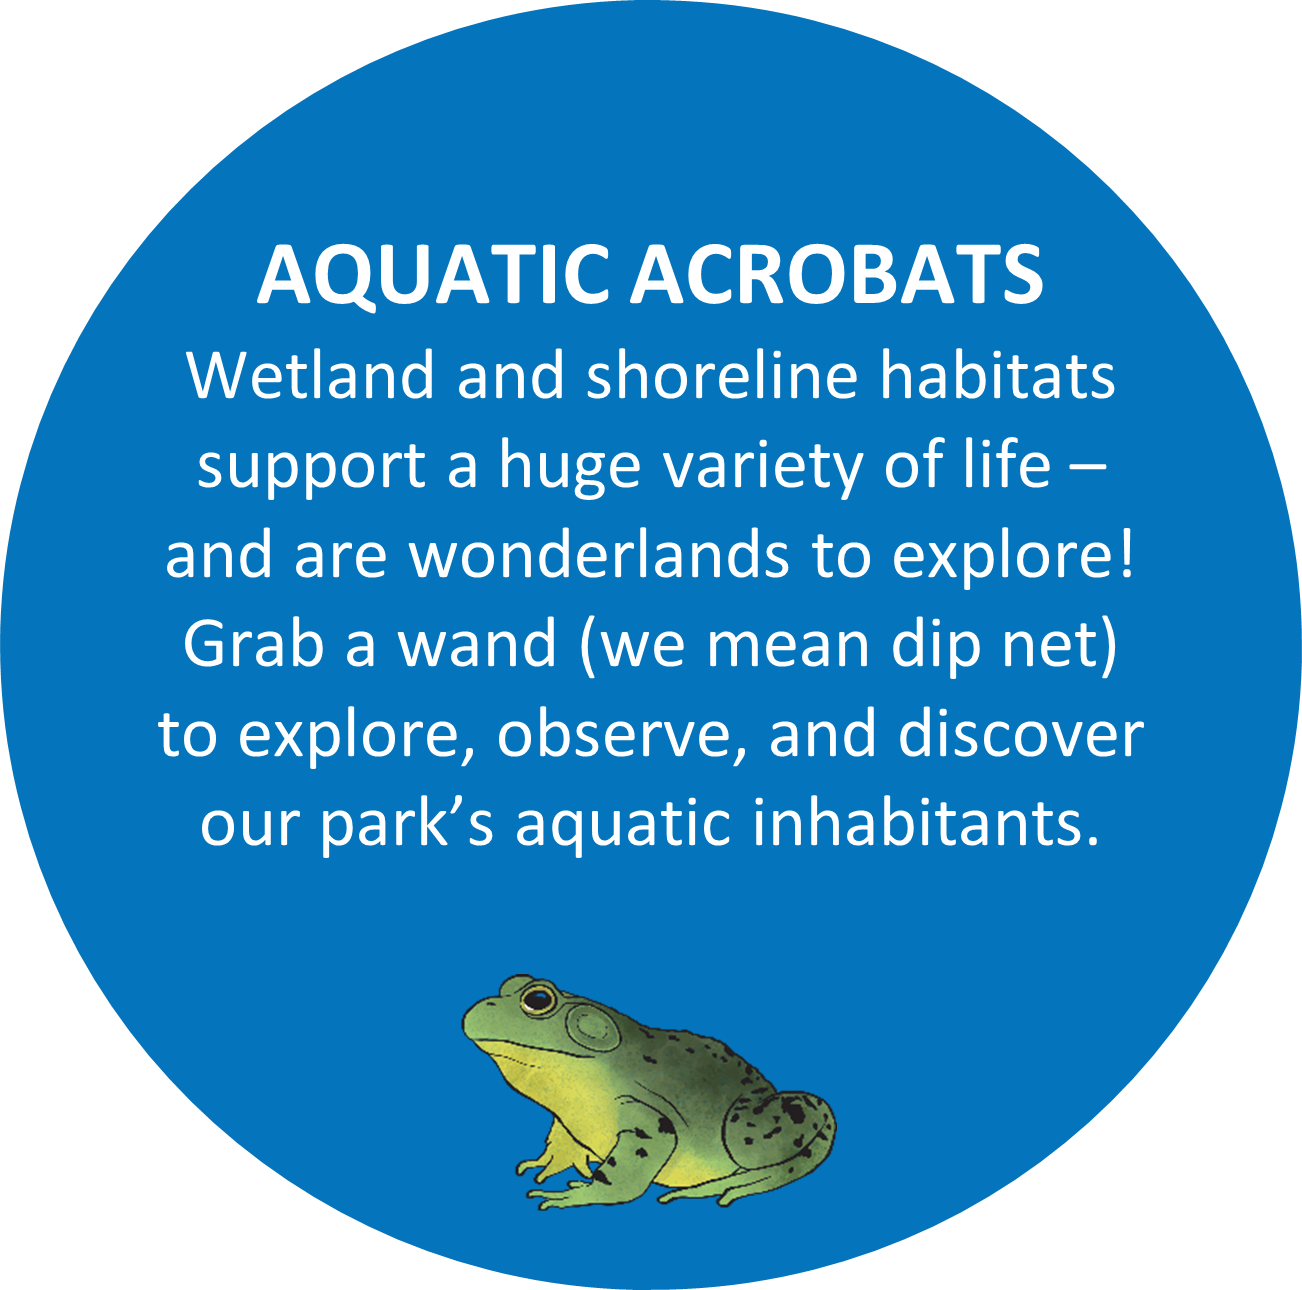 AQUATIC ACROBATS Wetland and shoreline habitats support a huge variety of life – and are wonderlands to explore! Grab a wand, we mean dip net, to explore, observe, and discover our park’s aquatic inhabitants.